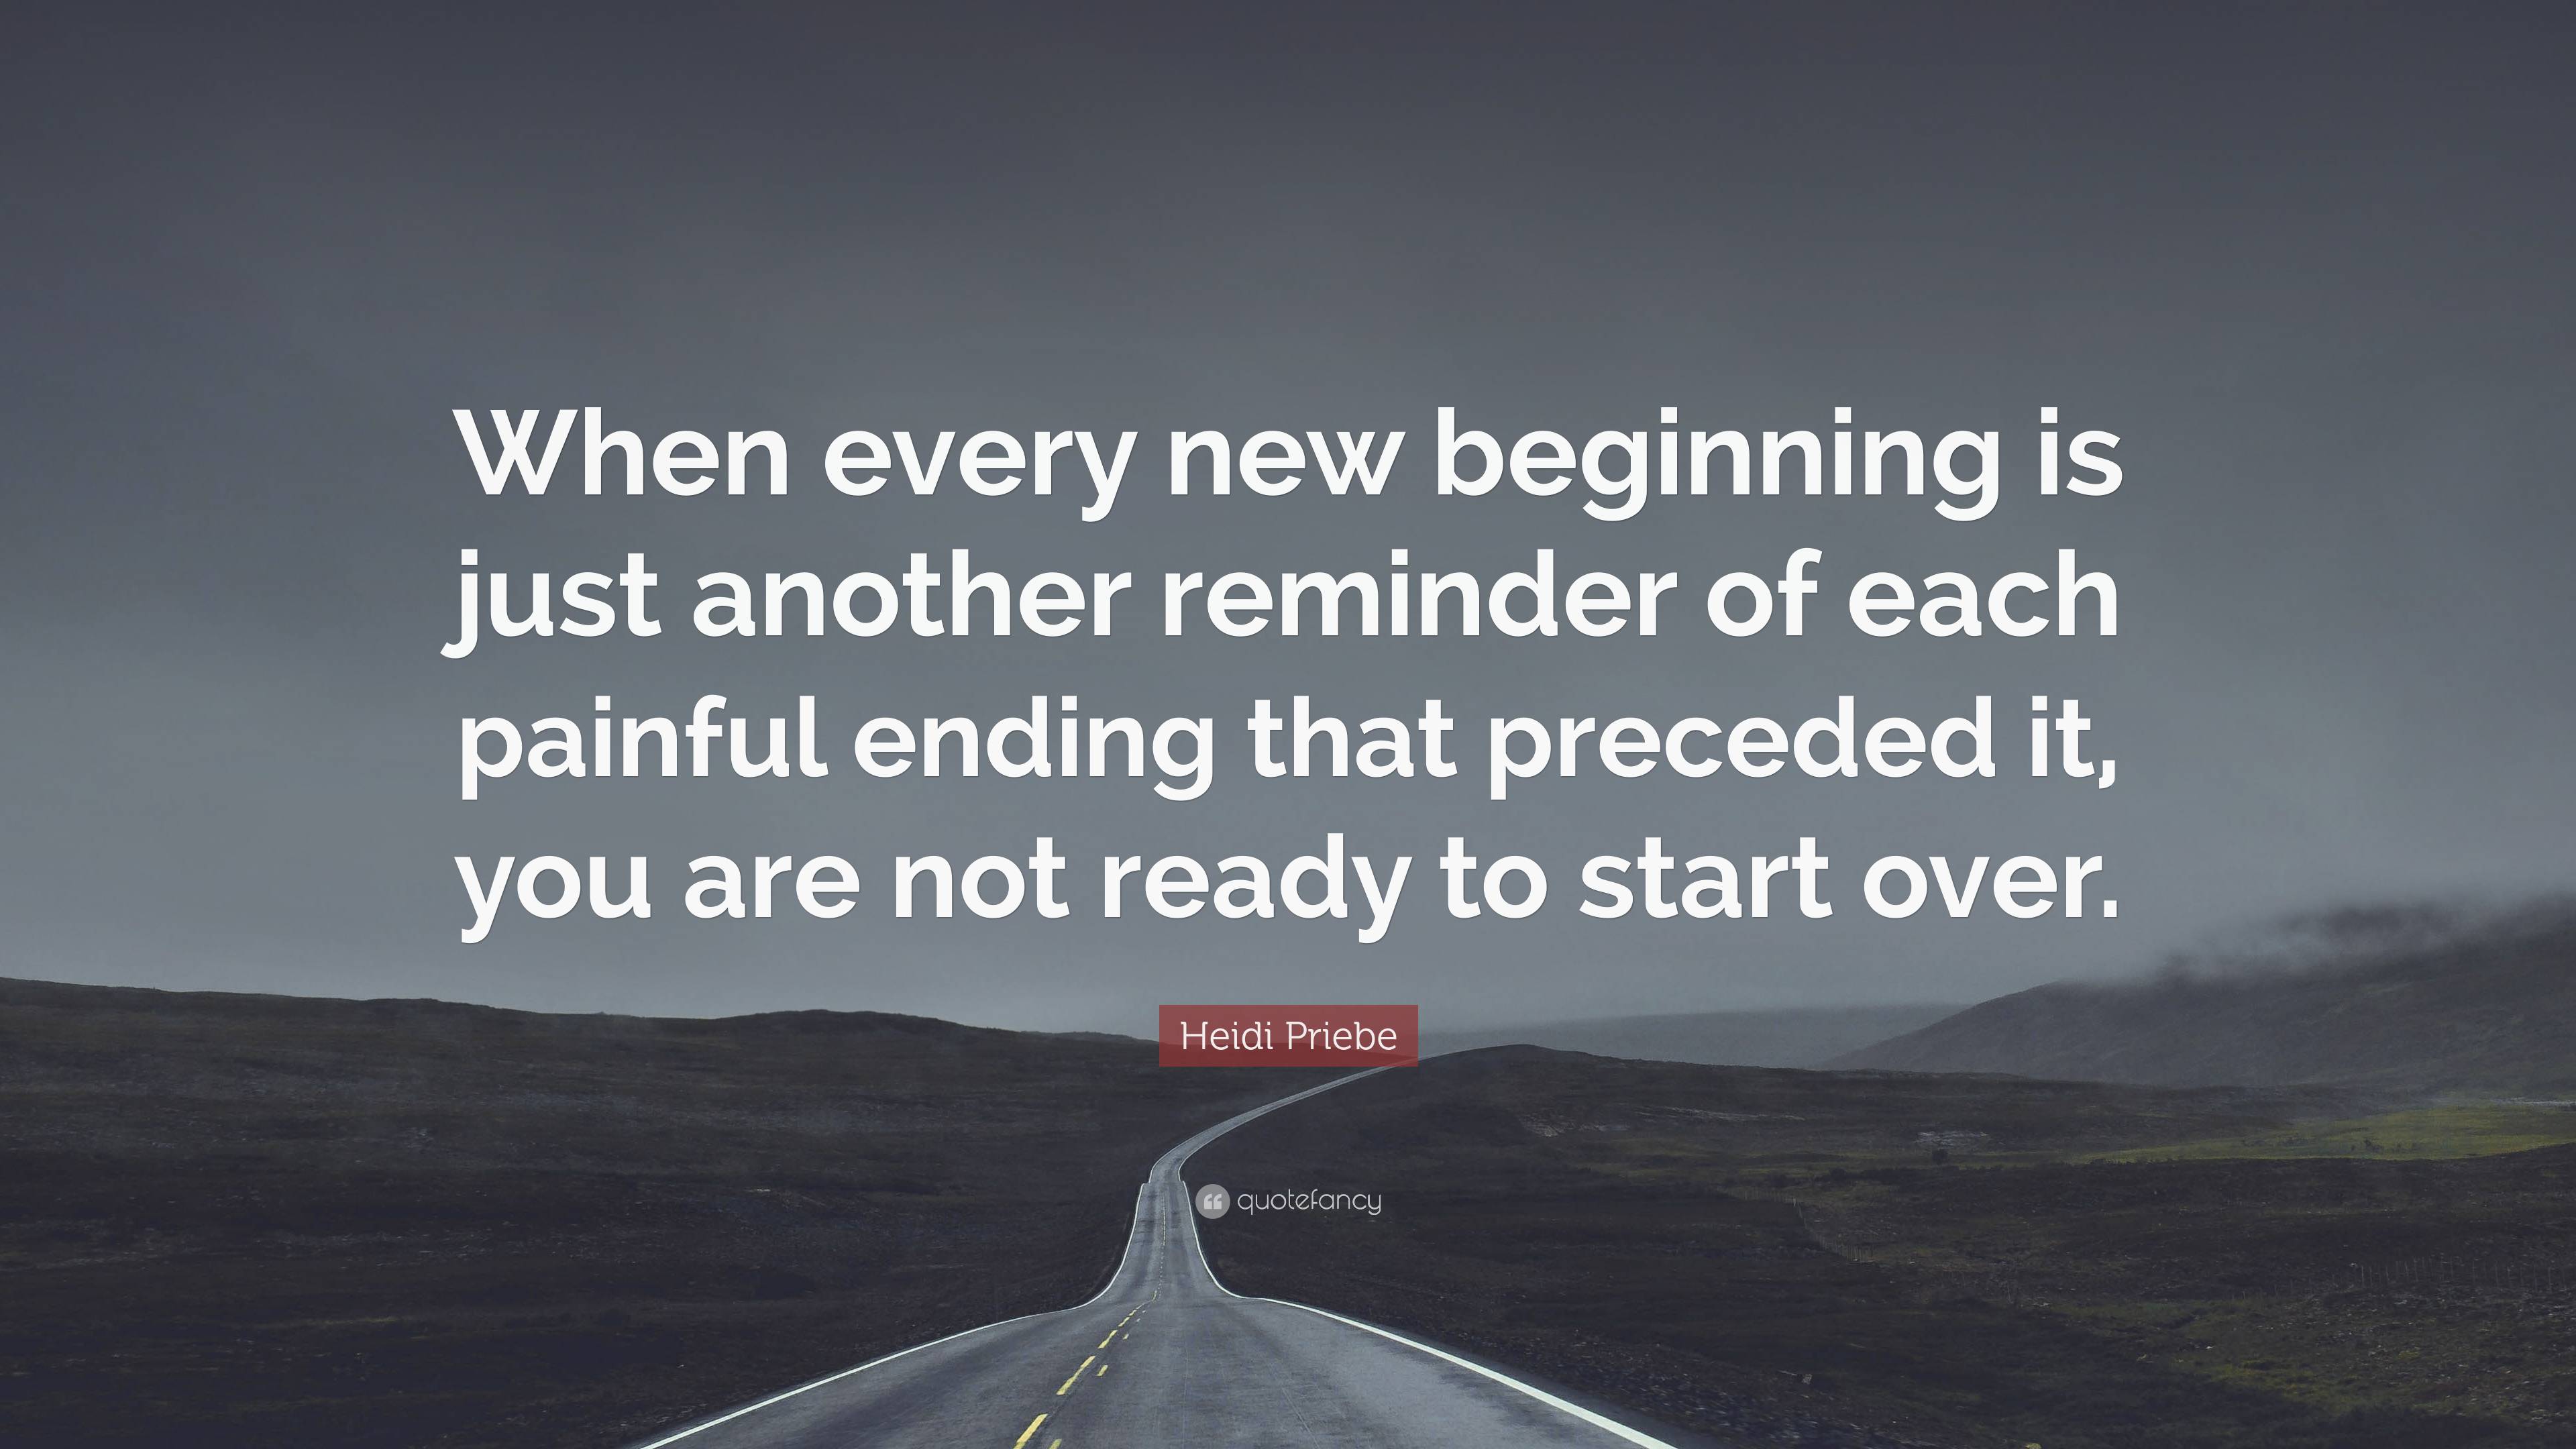 Heidi Priebe Quote: “When every new beginning is just another reminder ...